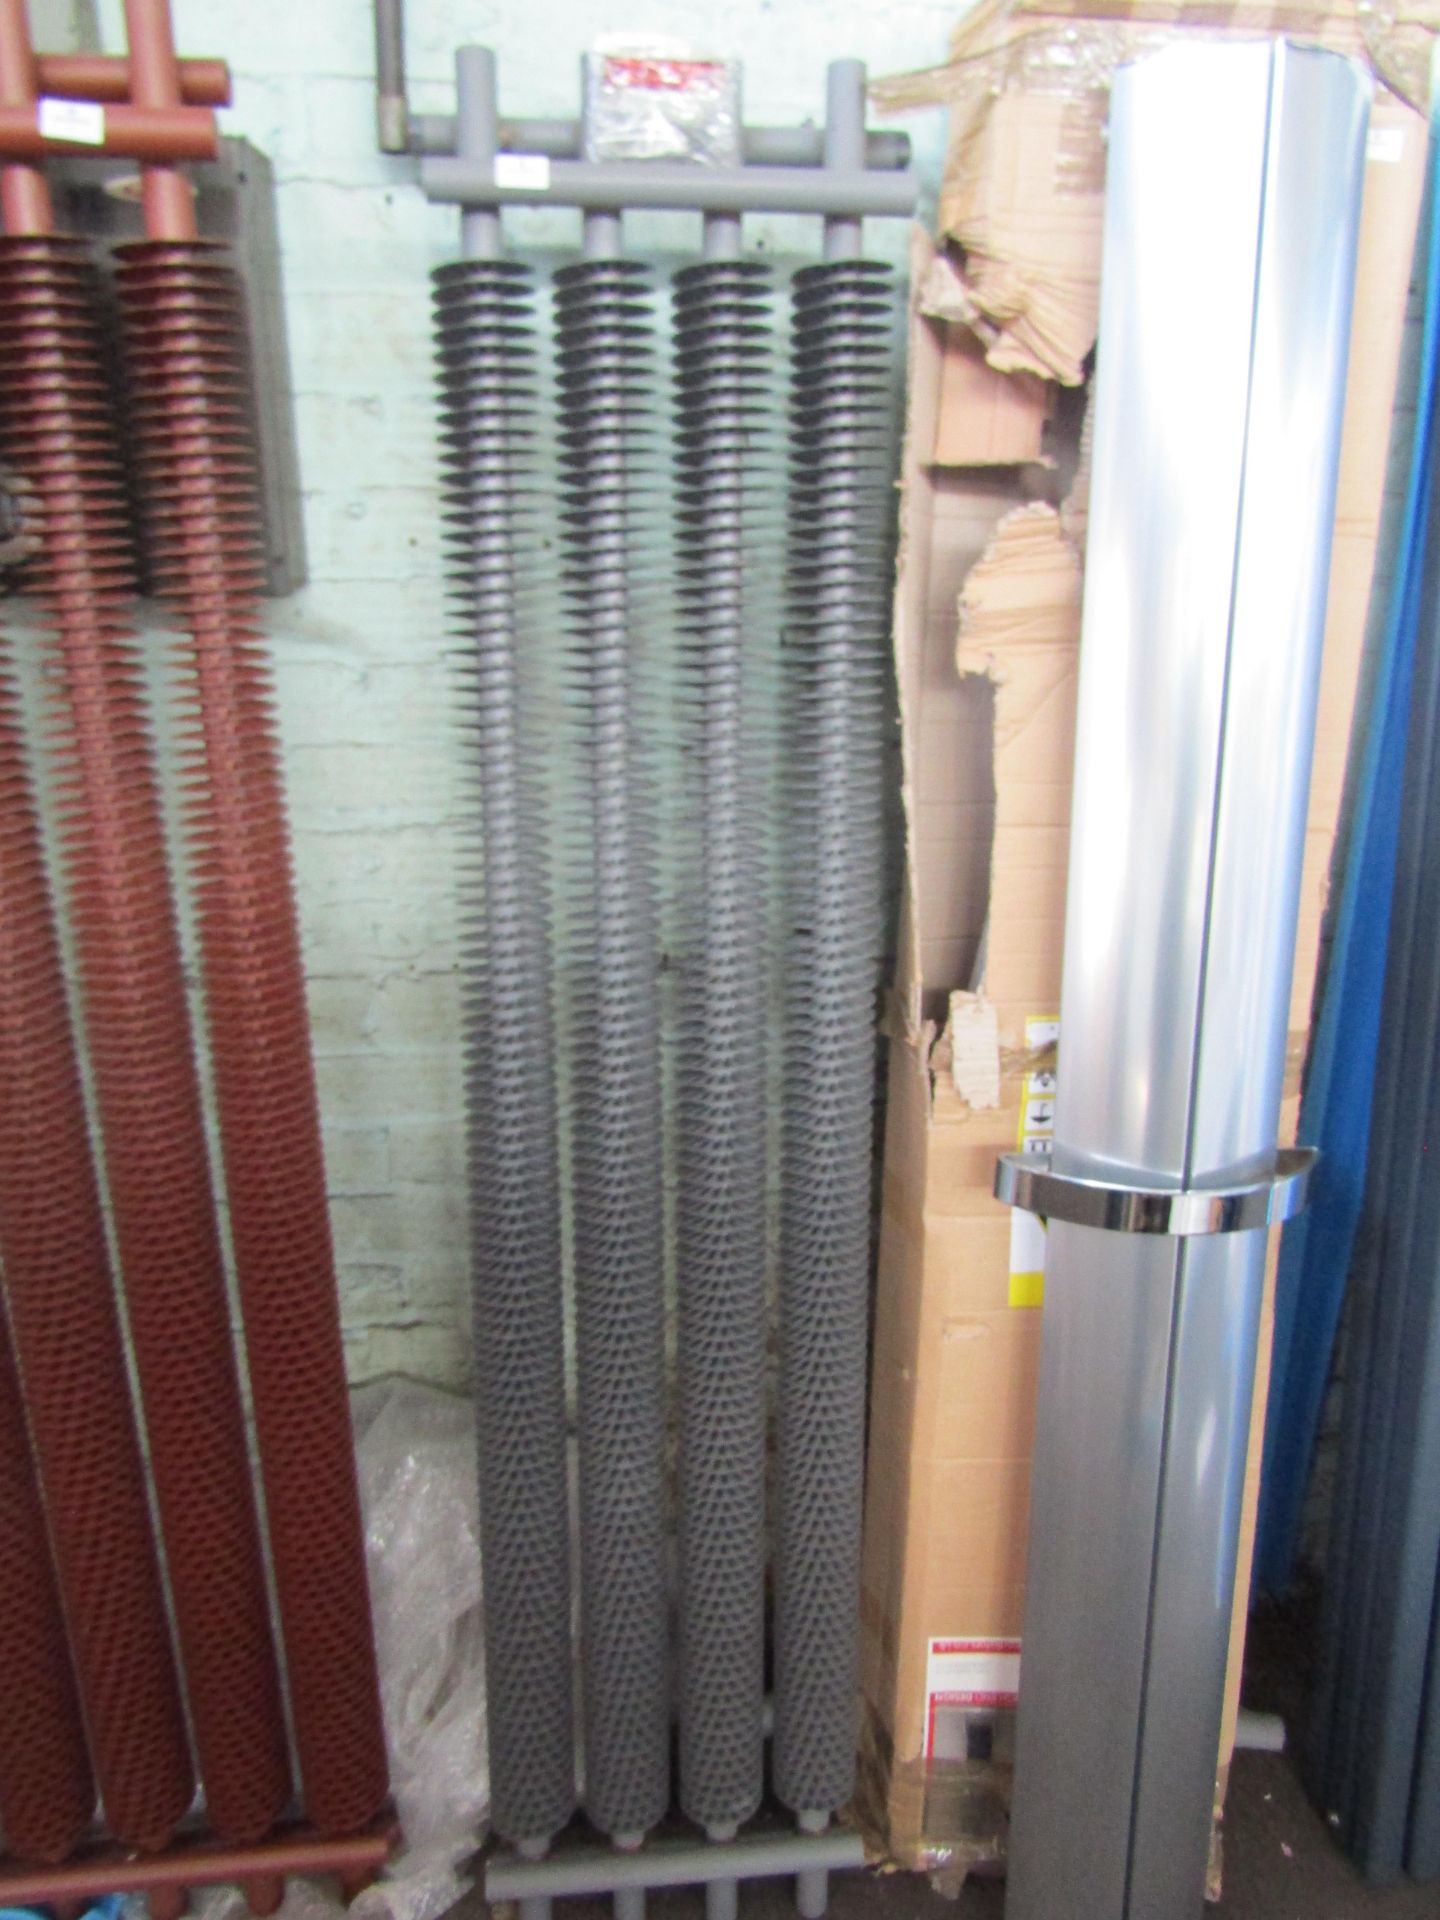 Carisa Dora Grey steel Industrial style radiator, 1800x390mm, missing wall brackets, has a scuff - Image 2 of 3